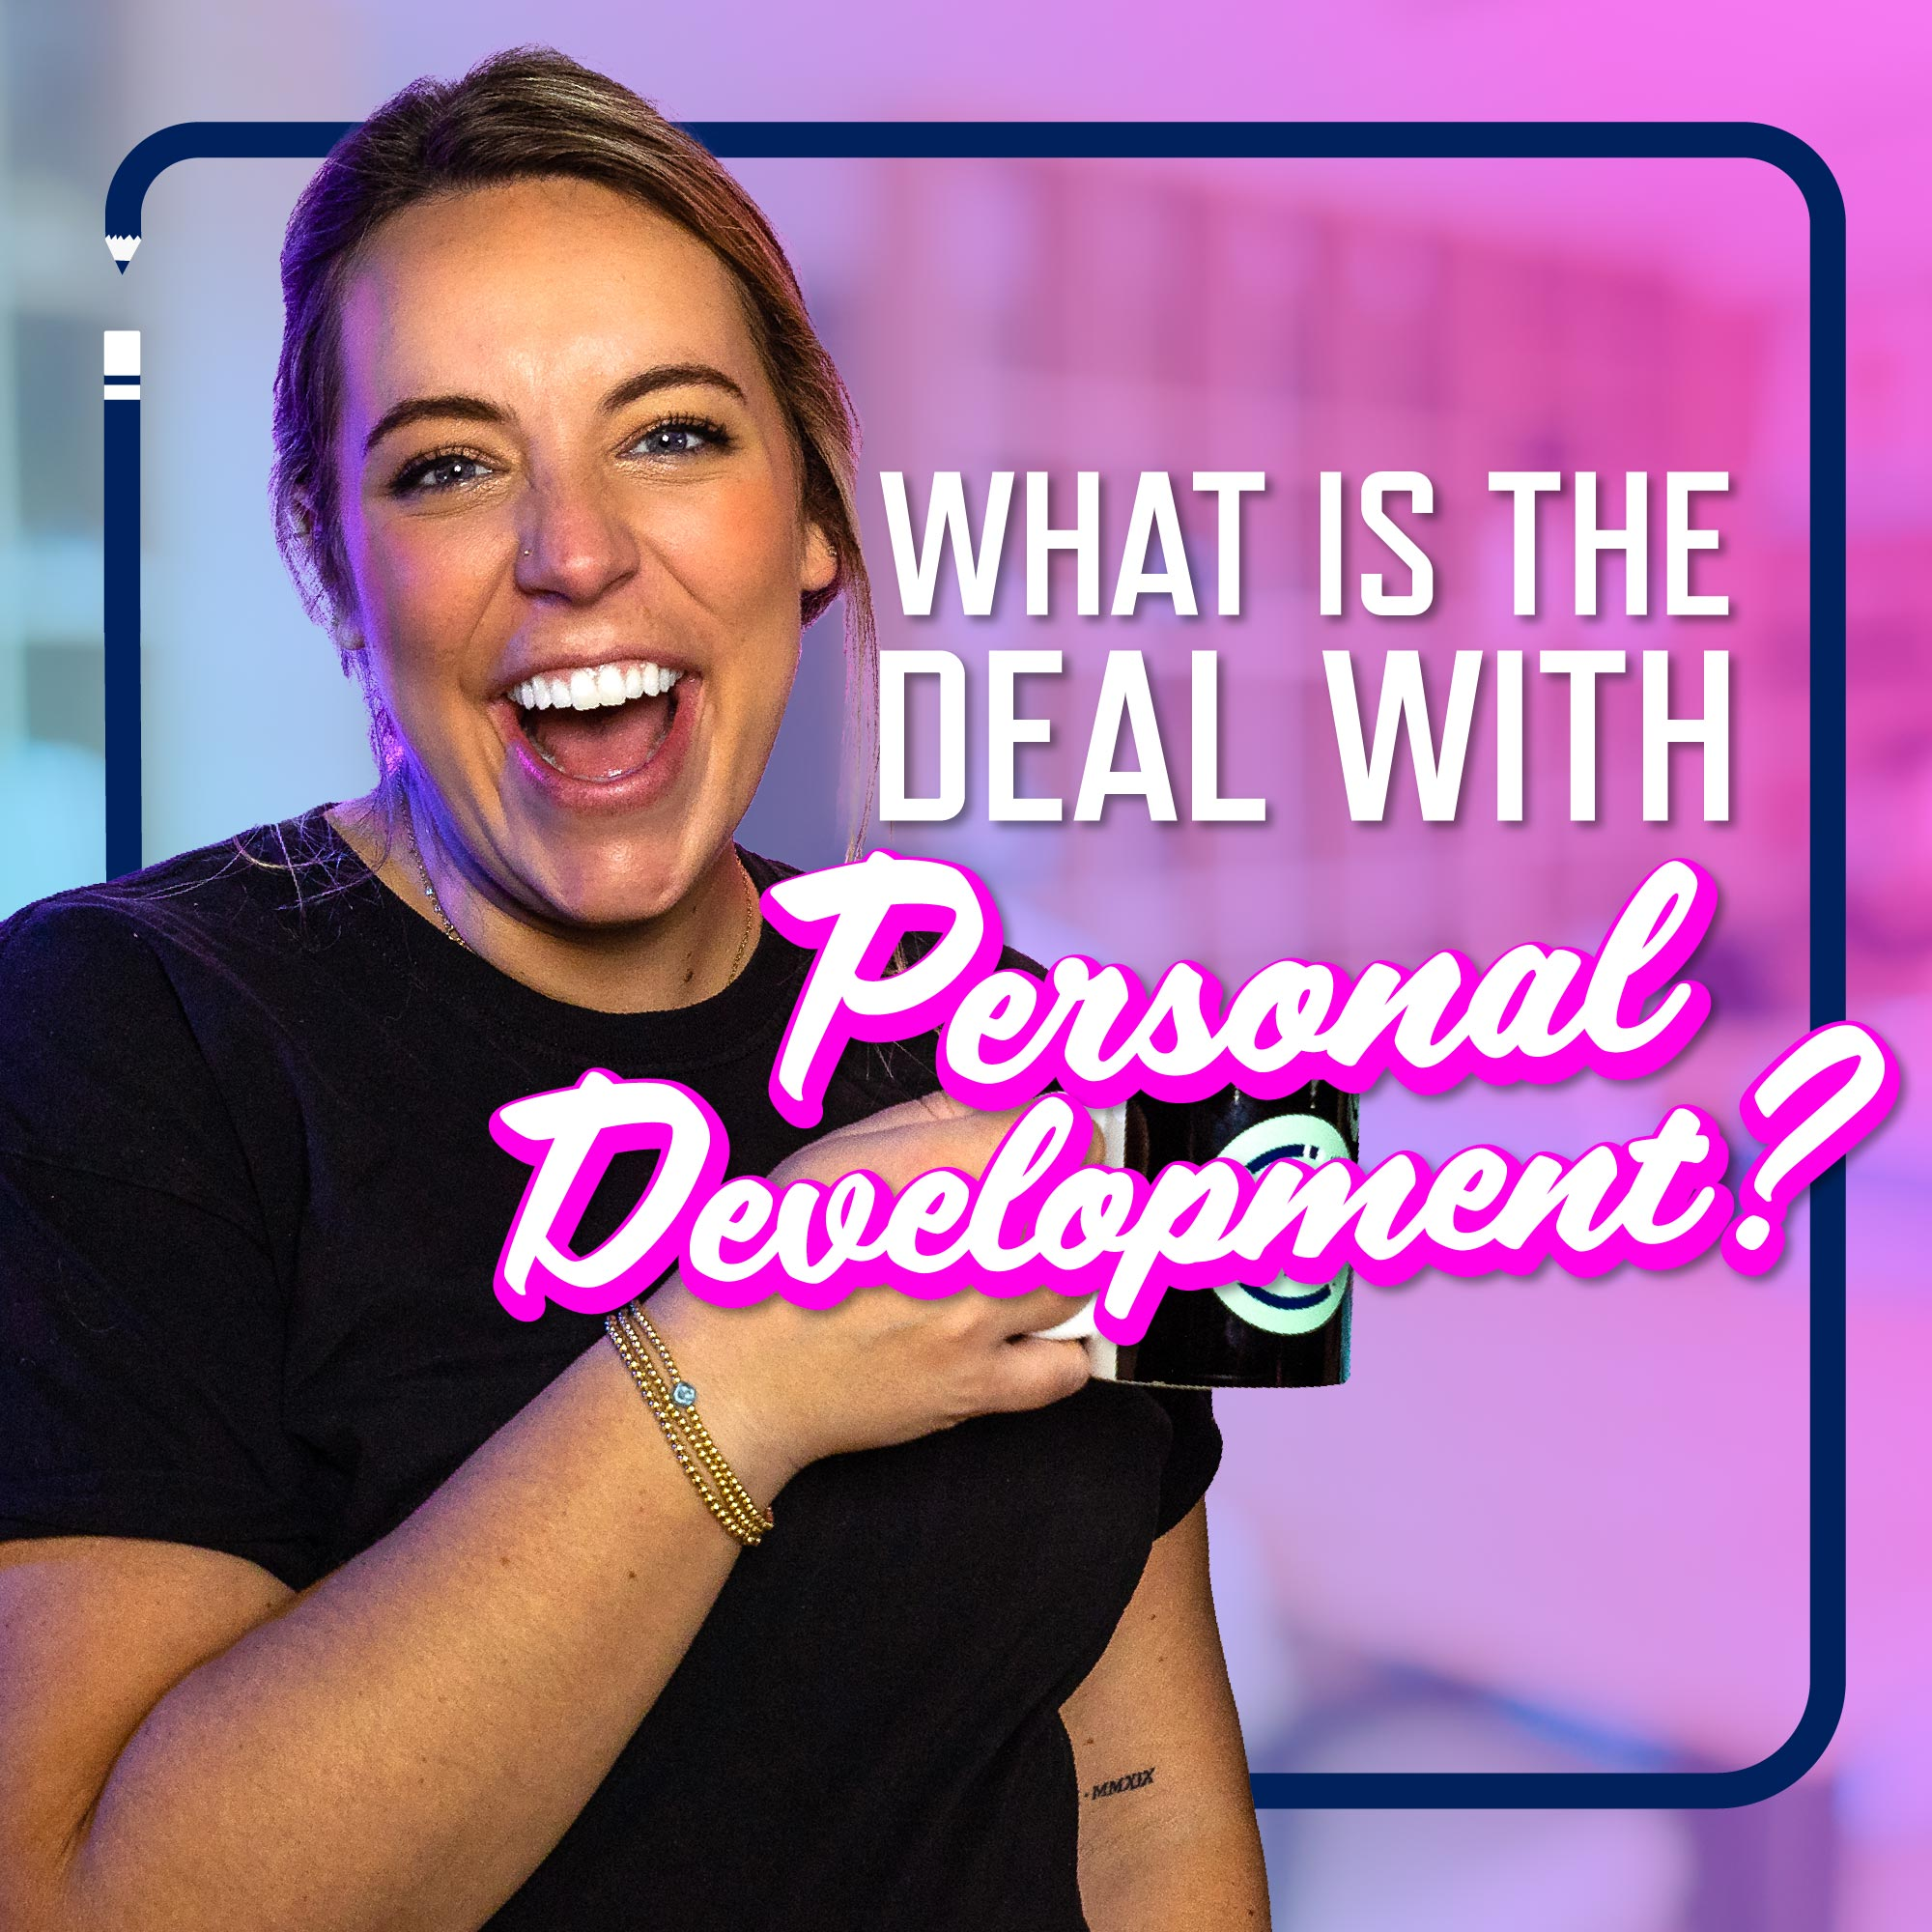 What Is The Deal With Professional Development?